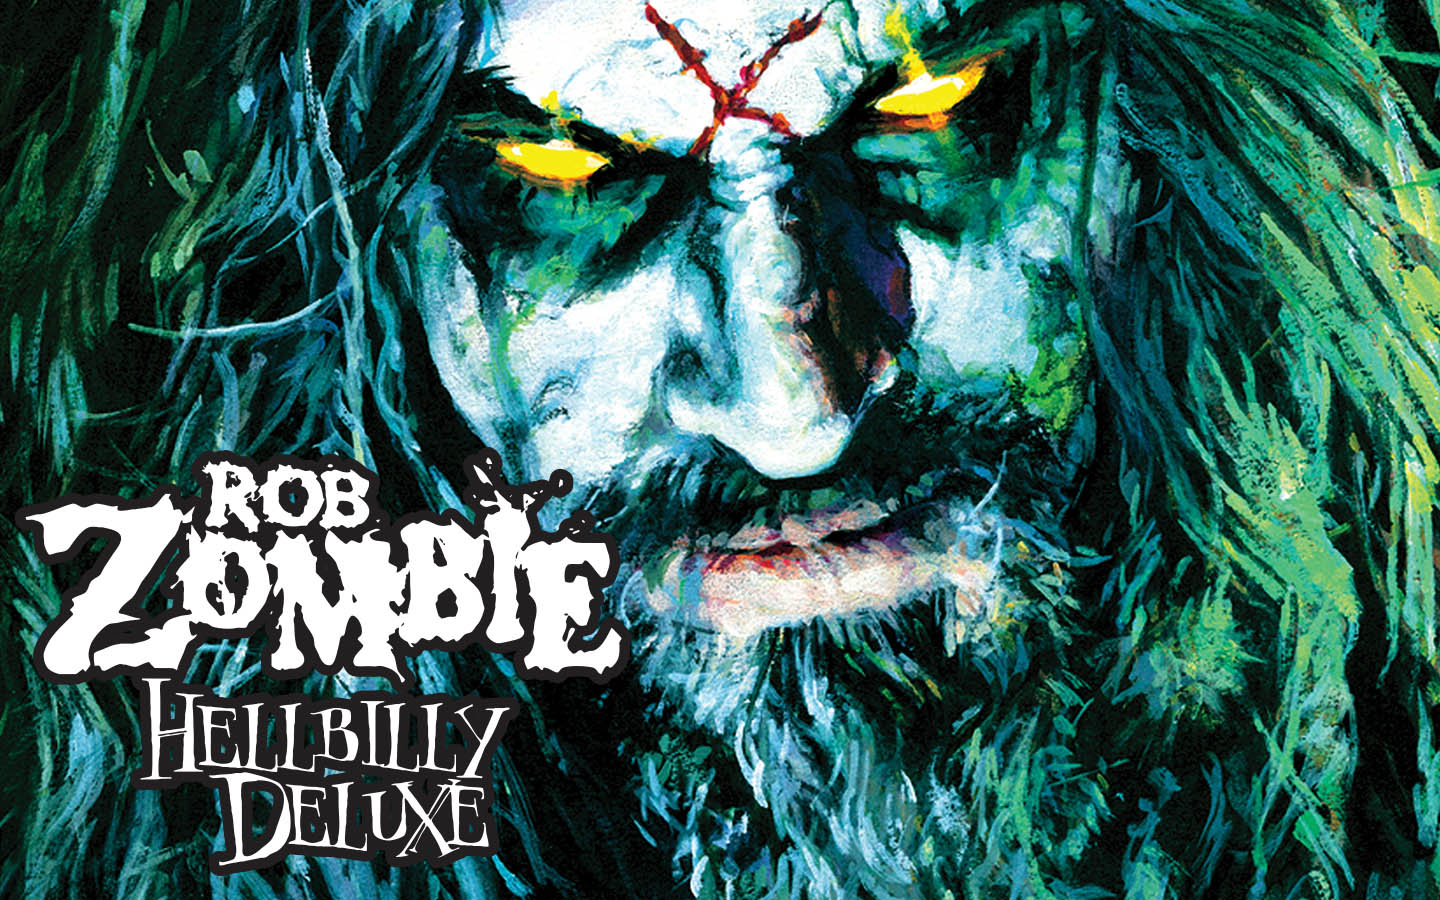 hellbilly deluxe 2 rob zombie